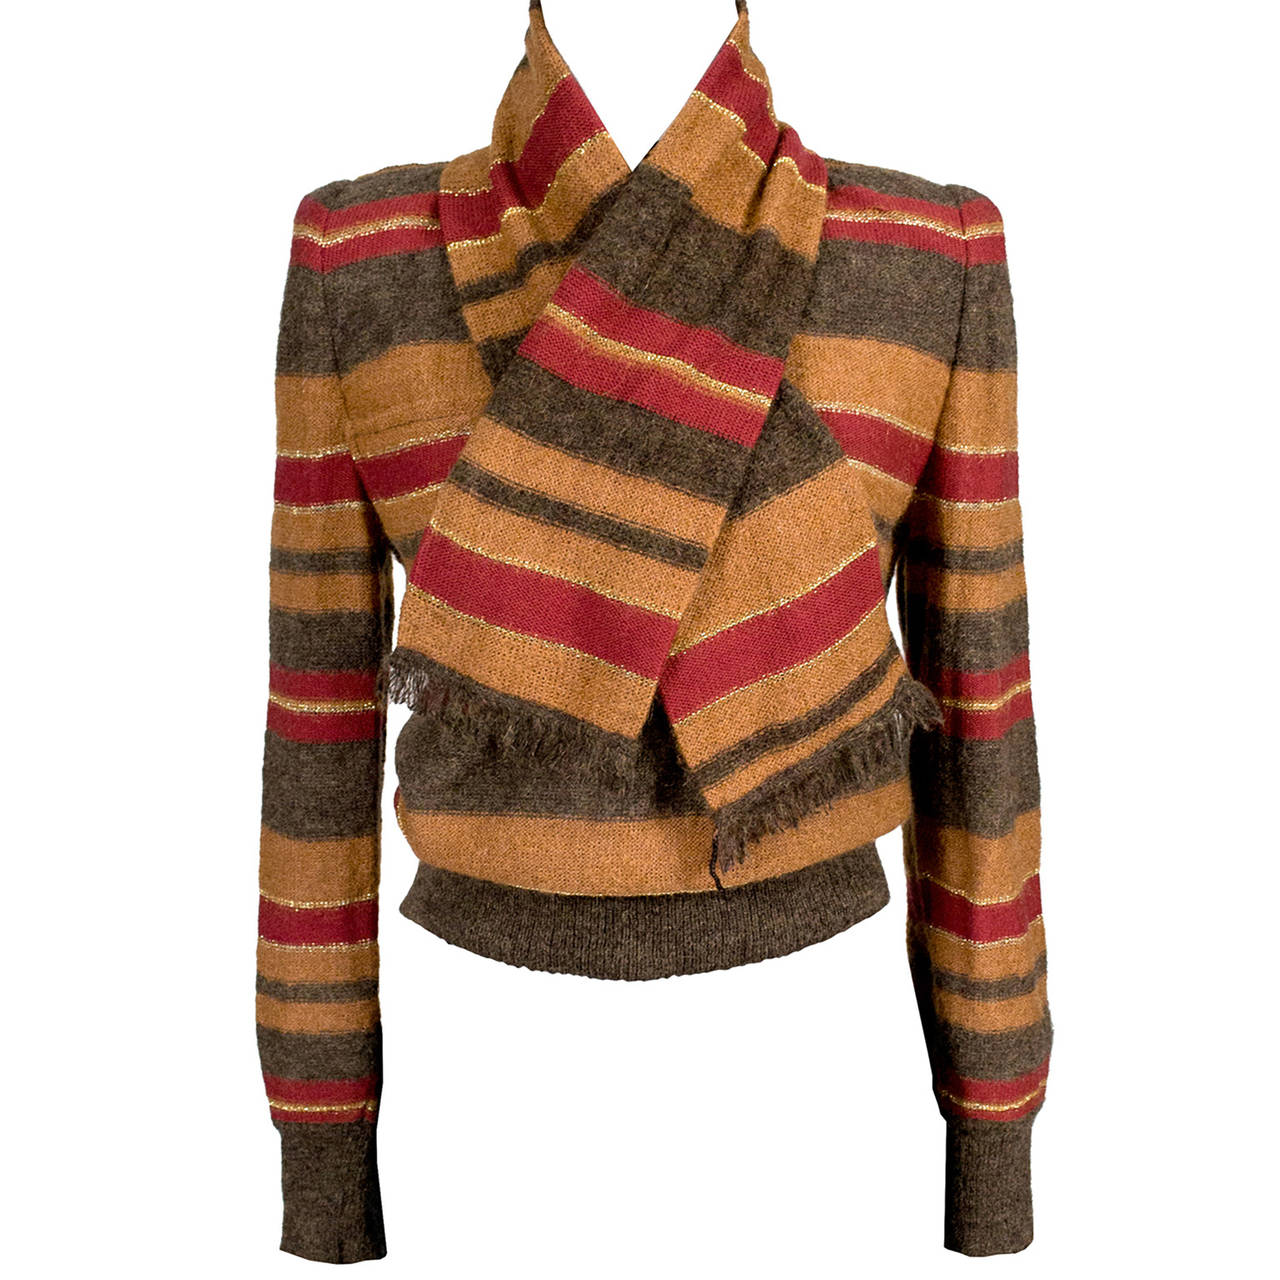 This is a beautiful vintage wool Valentino sweater with pretty velvet covered buttons and a velvet collar. Made in Italy in the late 1970s or early 1980s, this sweater has shoulder pads, a single front pocket, and a brown velvet collar that can be